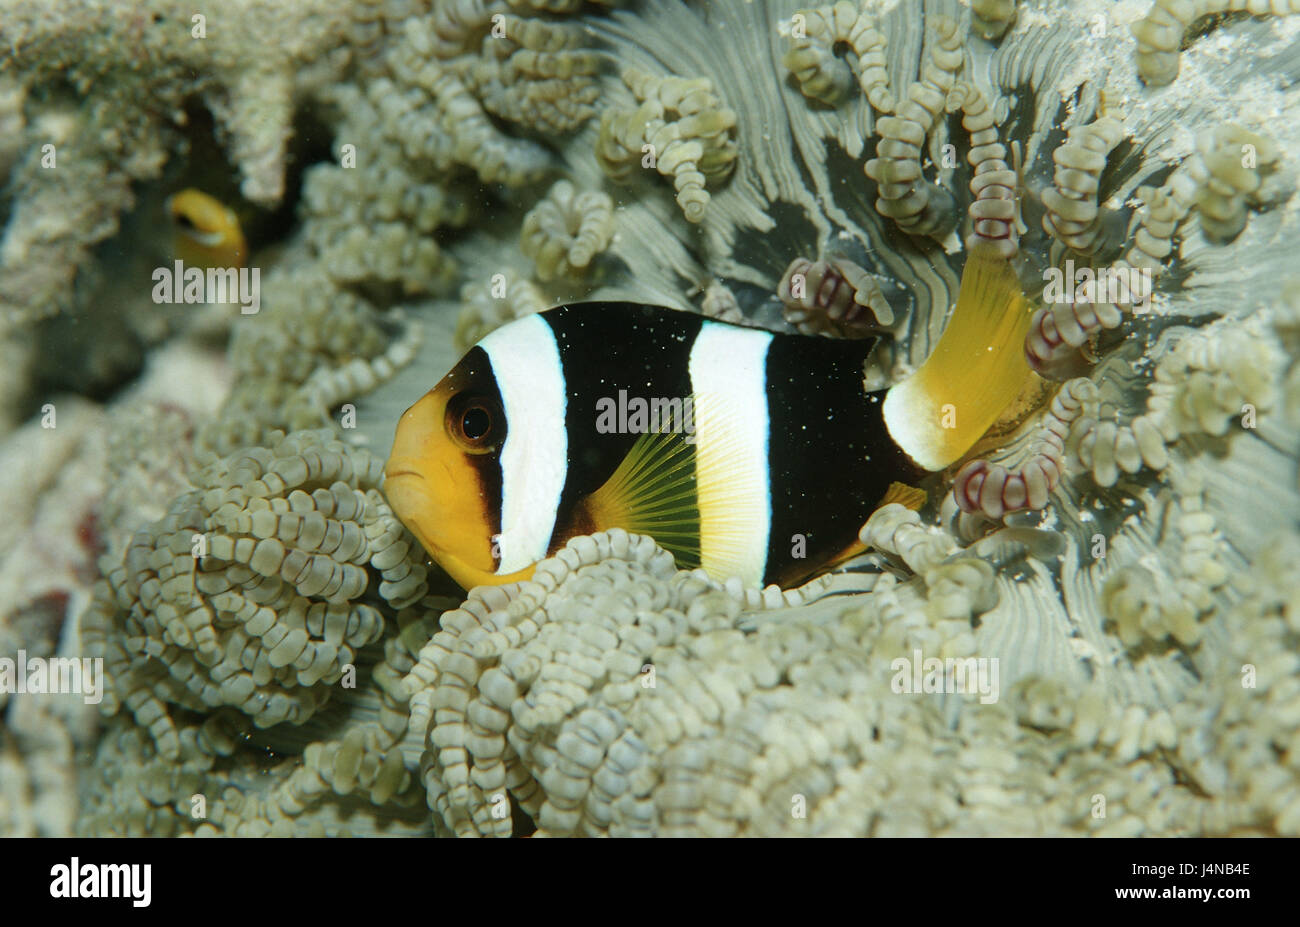 Clarks anemone fish, Amphiprion clarkii, coral reef, Stock Photo